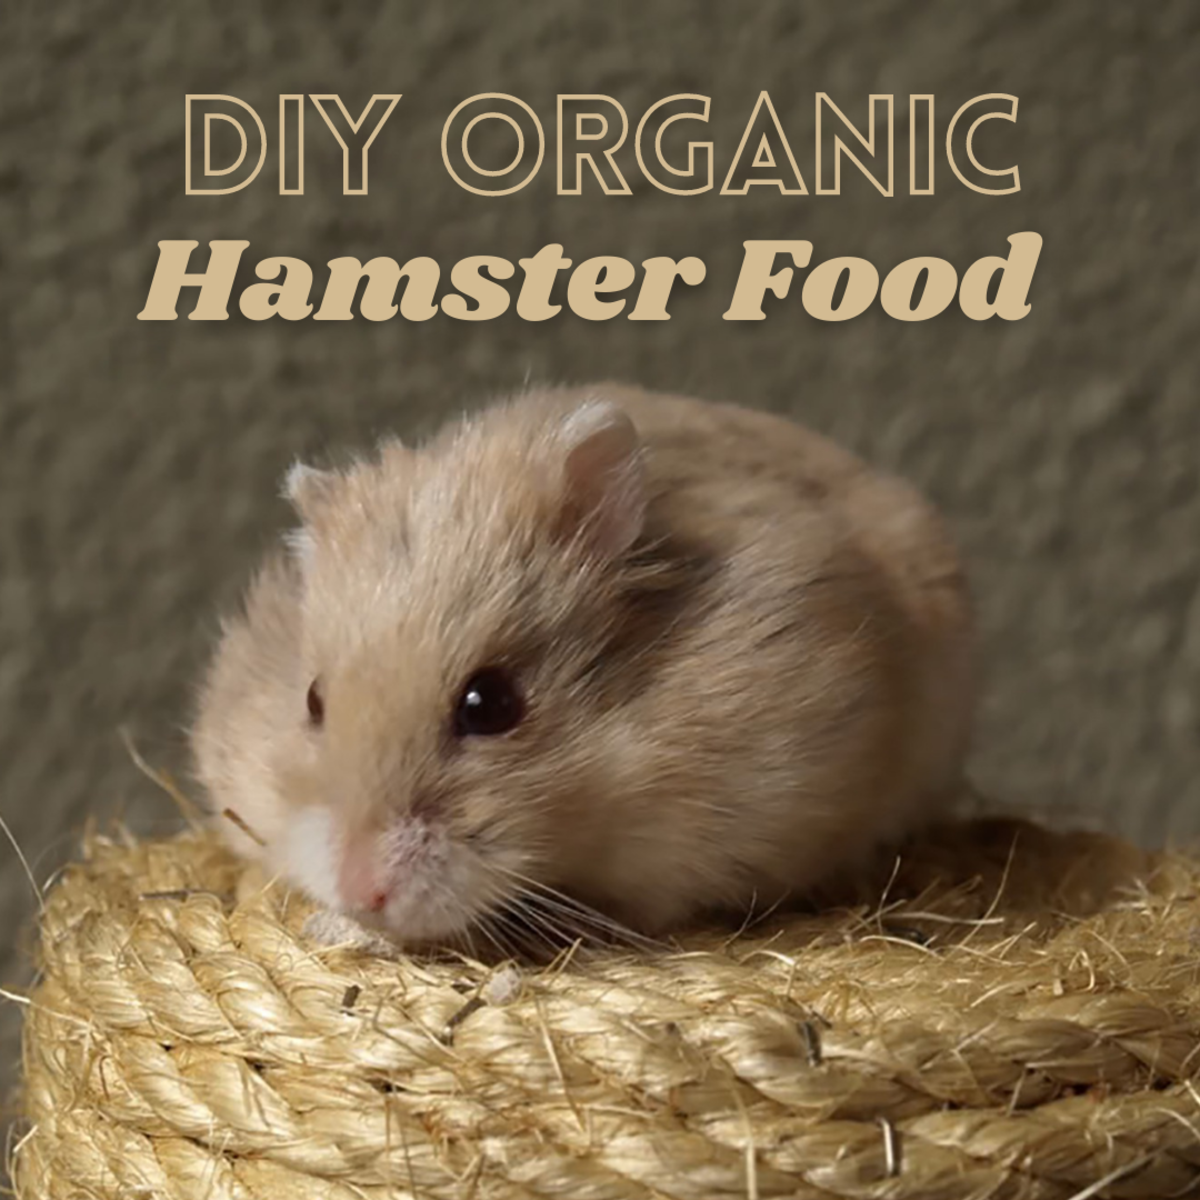 DIY organic hamster food recipe and guide to feeding your hamster